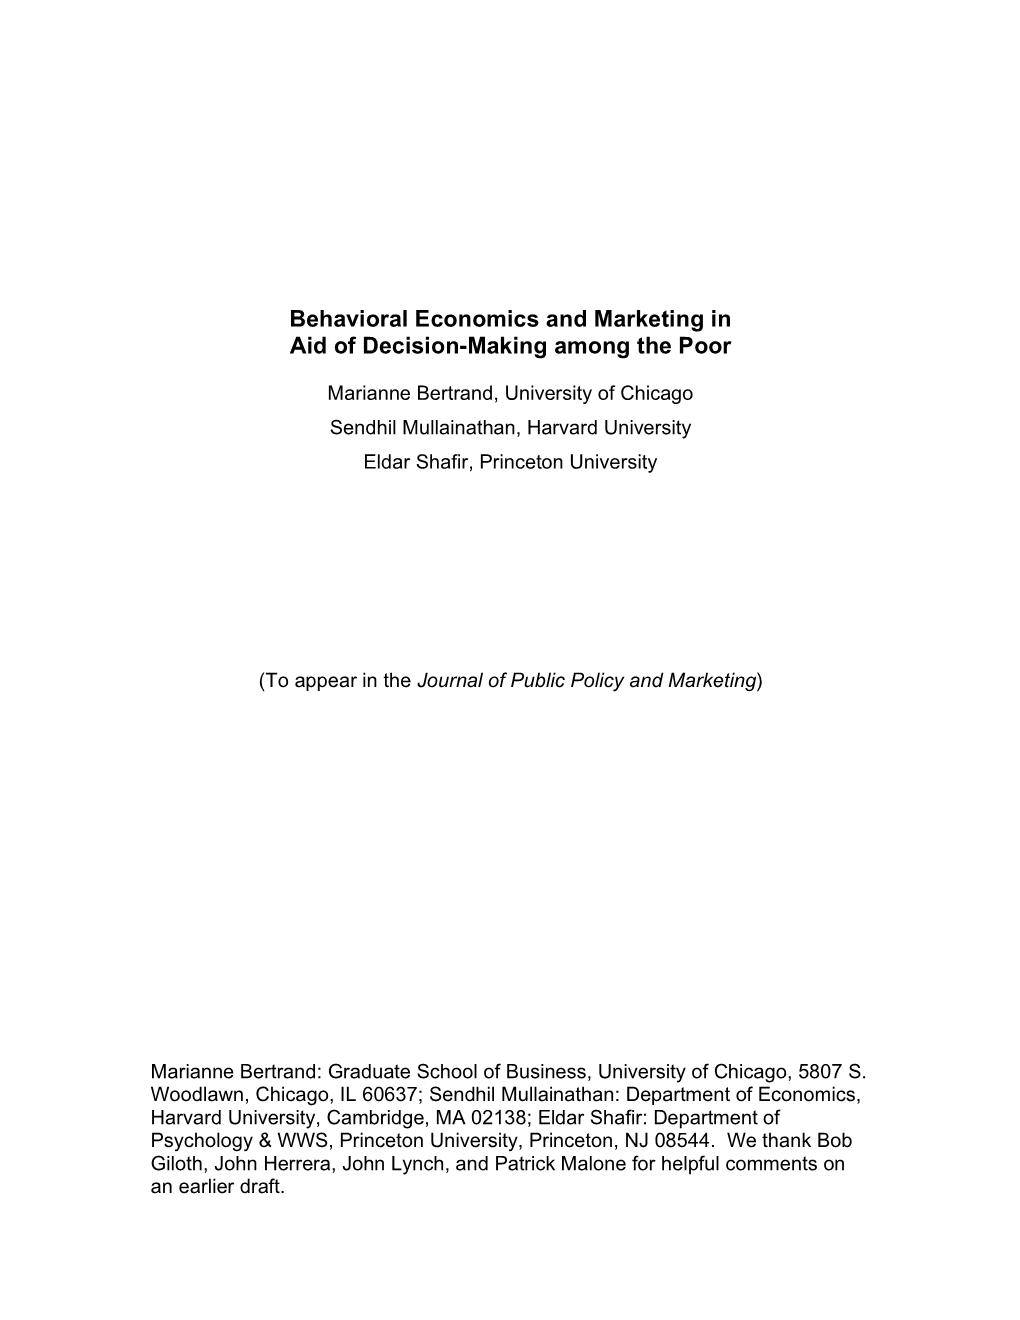 Behavioral Economics and Marketing in Aid of Decision-Making Among the Poor